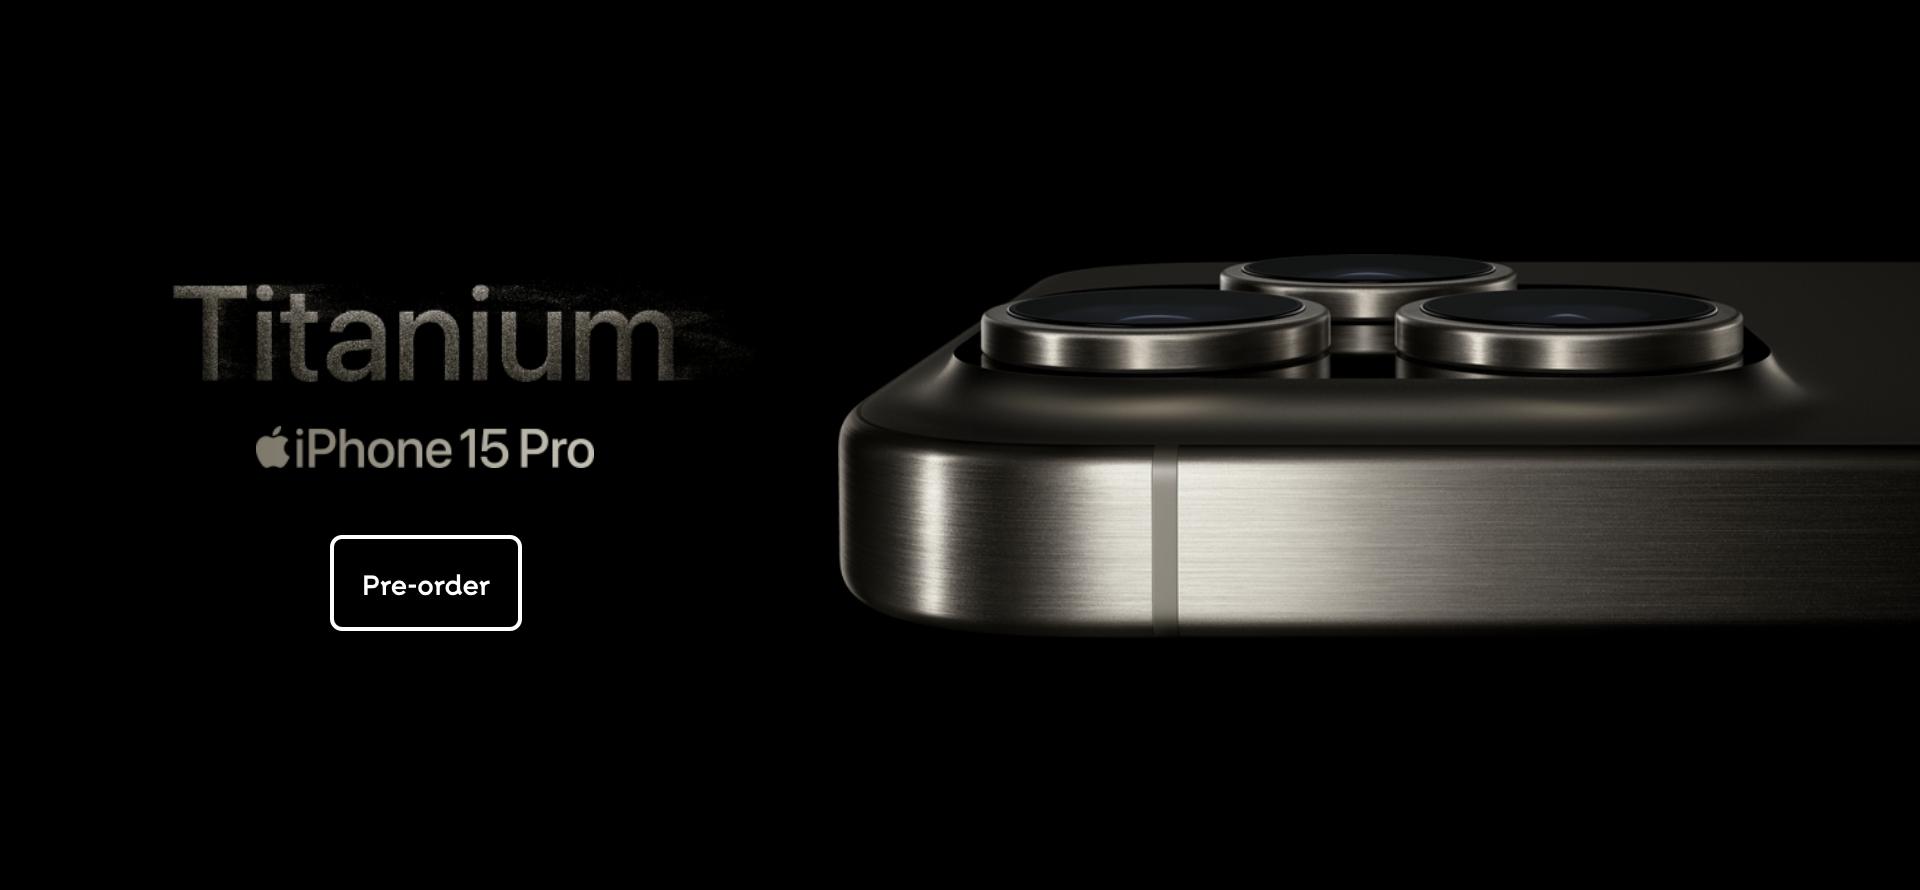 iPhone 15 Pro. Now with Titanium. Pre-order now.